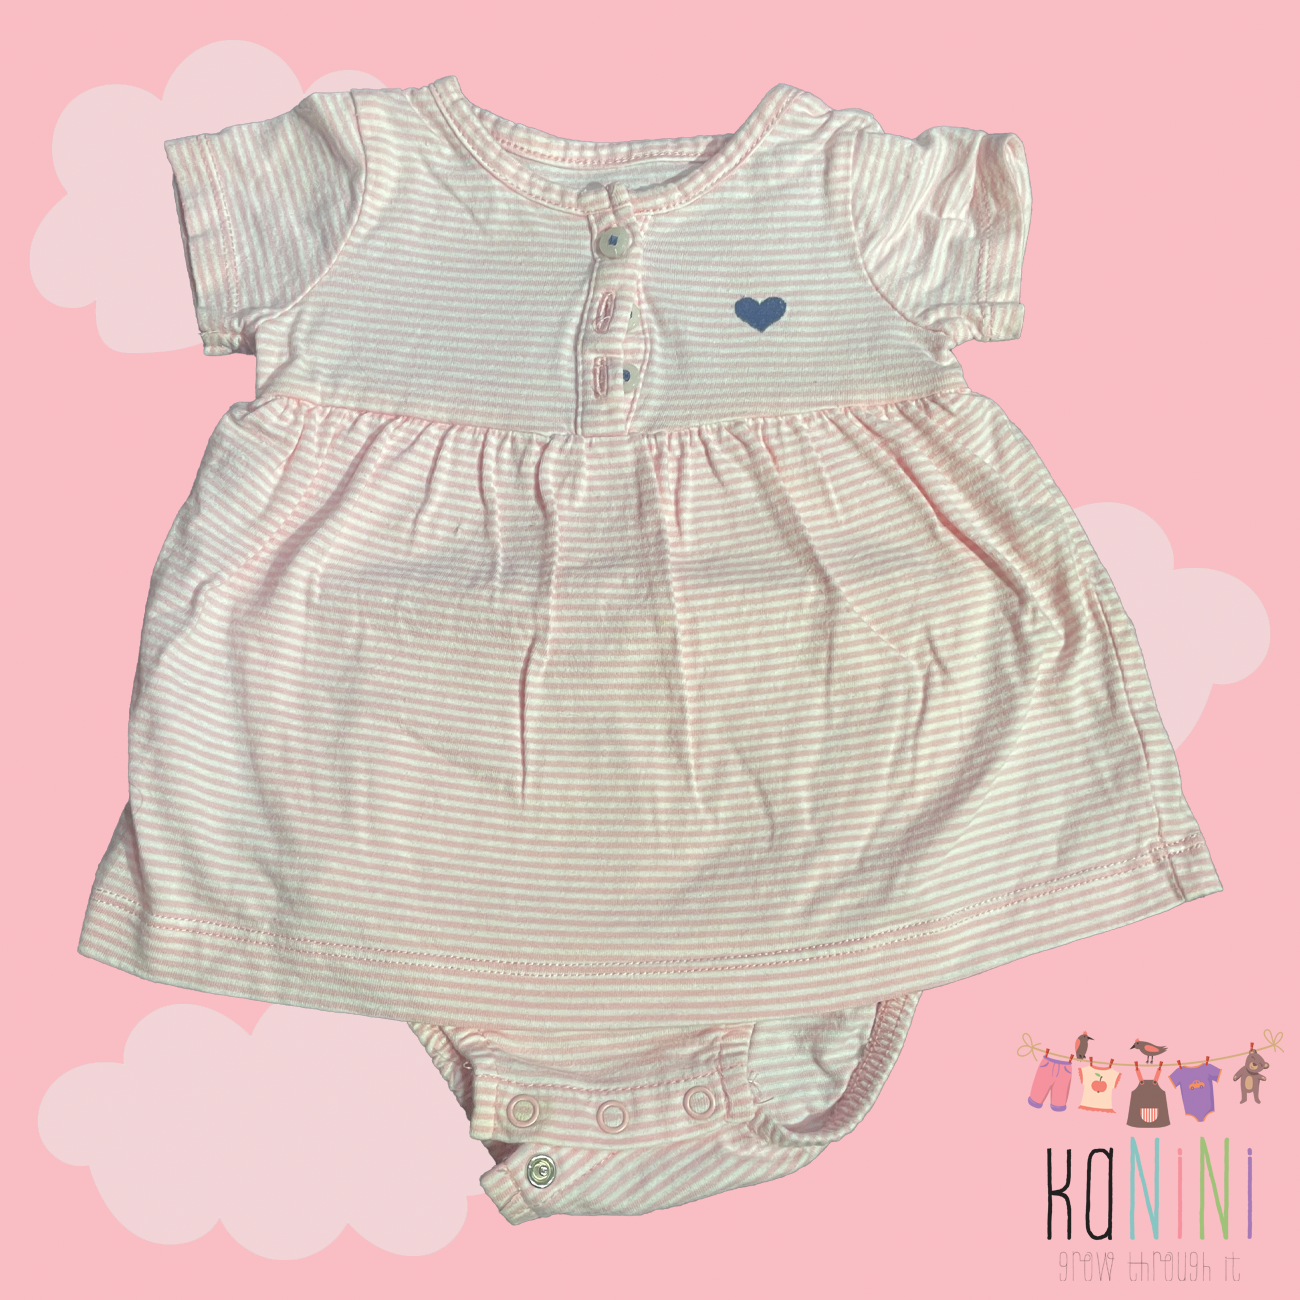 Featured image for “Carter's 6 Months Girls Striped Romper”